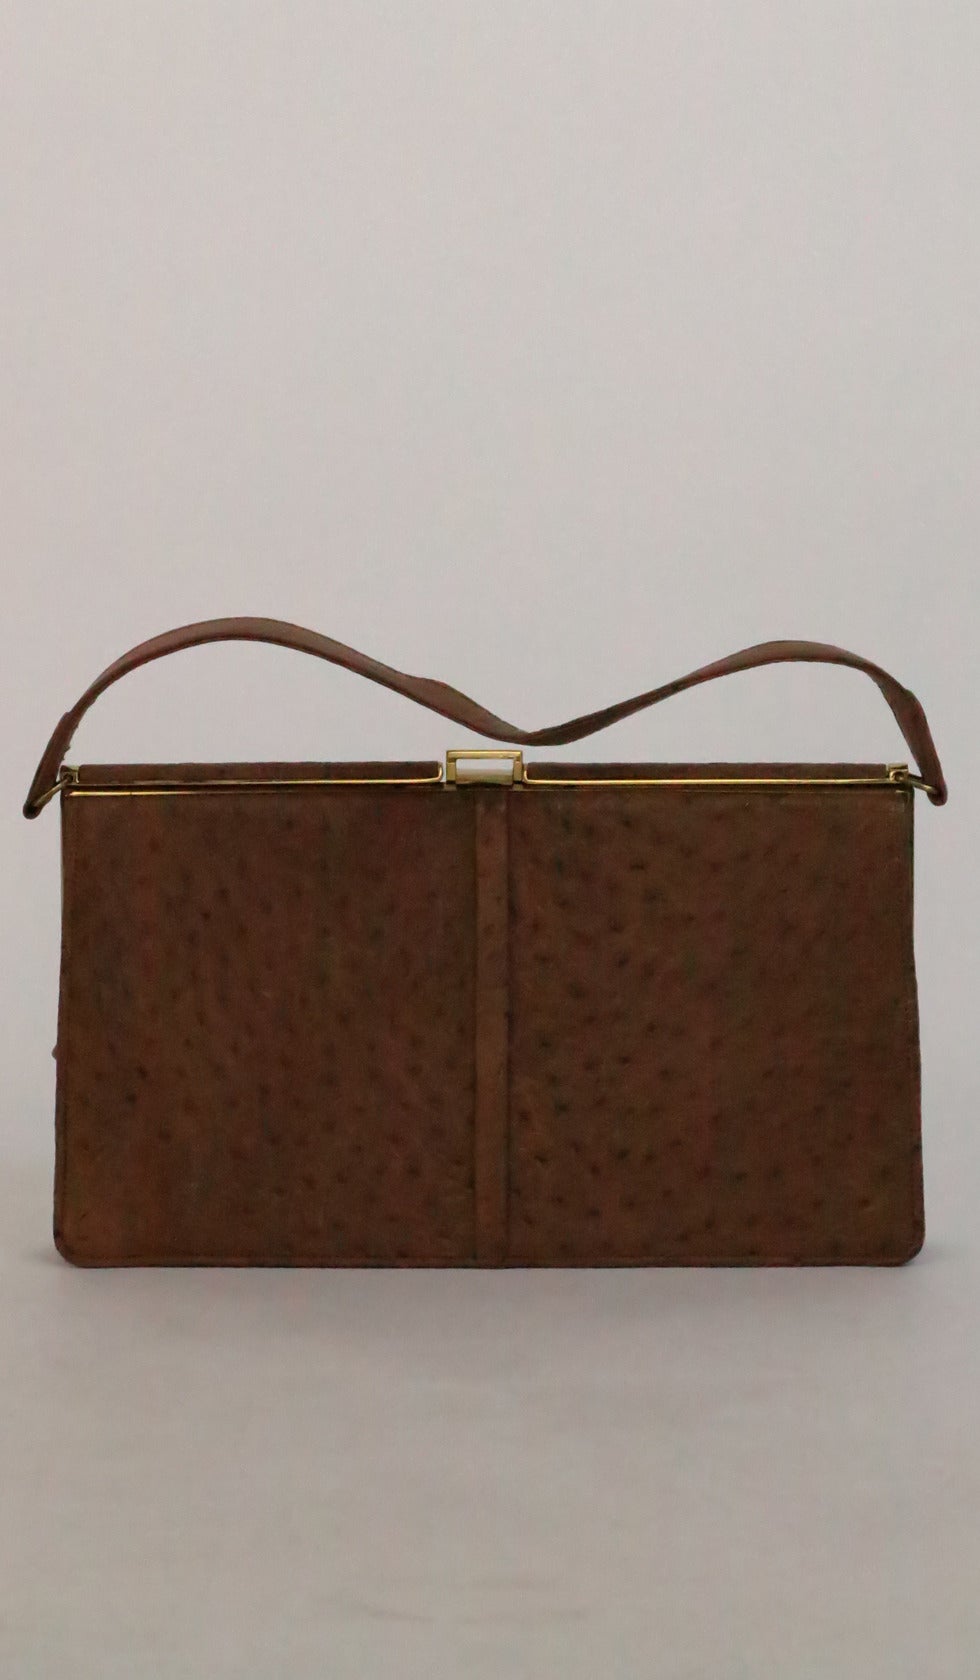 Fassbender was an luxury English leather goods company, their first bags appearing around 1930…Hand made with quality exotic skins the bags are collectable today…1950s handmade bag of camel tan ostrich skin, this is a classic structured shape frame